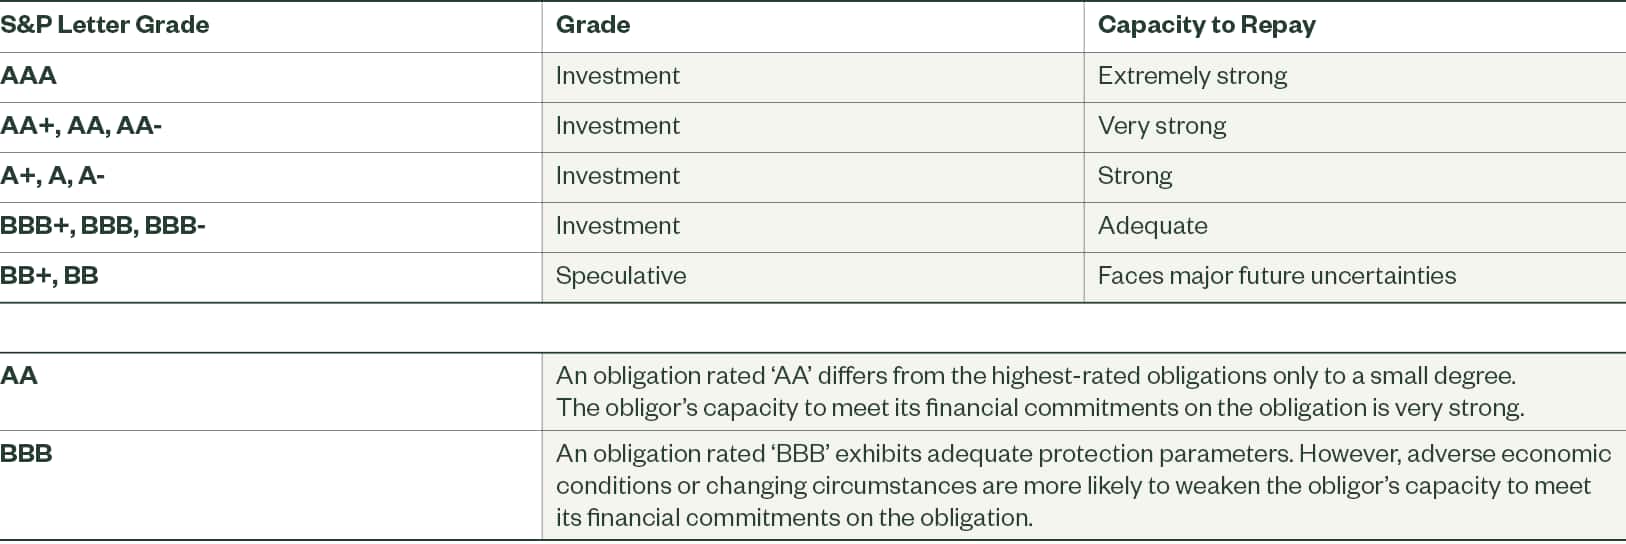 Extract from S&P Rating Methodology